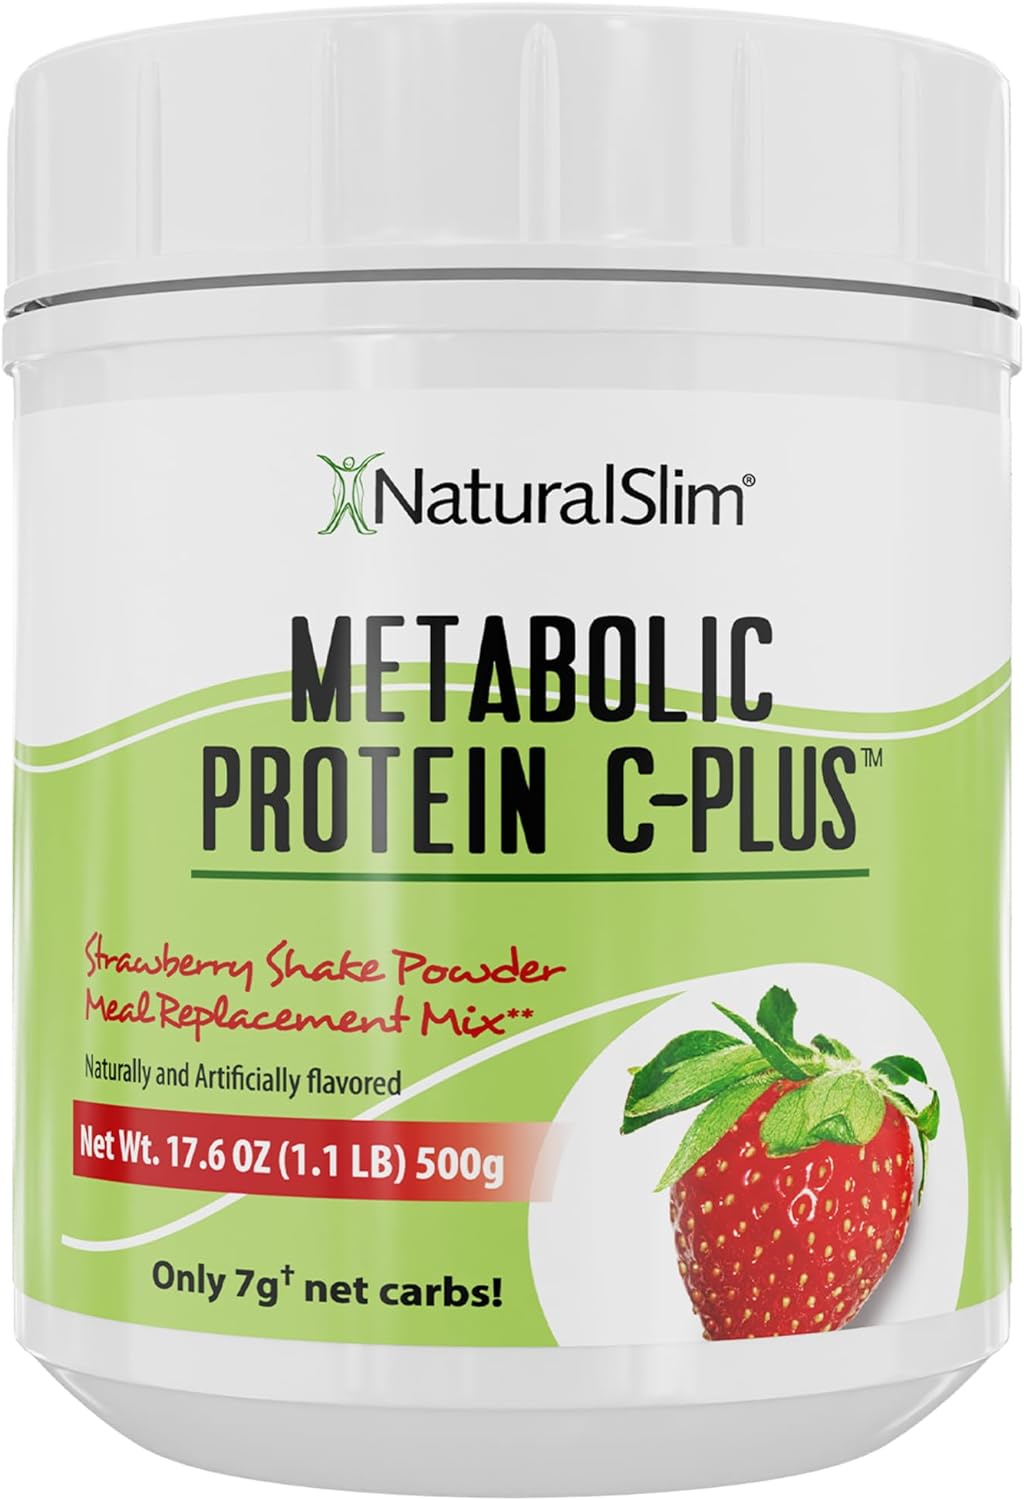 NaturalSlim Strawberry Metabolic C-Plus Meal Replacement Protein Powder - Low Carb Protein Shake with Immune Support Fortified with Vitamin C, Zinc & Amino Acid - 10 Servings 17.6 oz